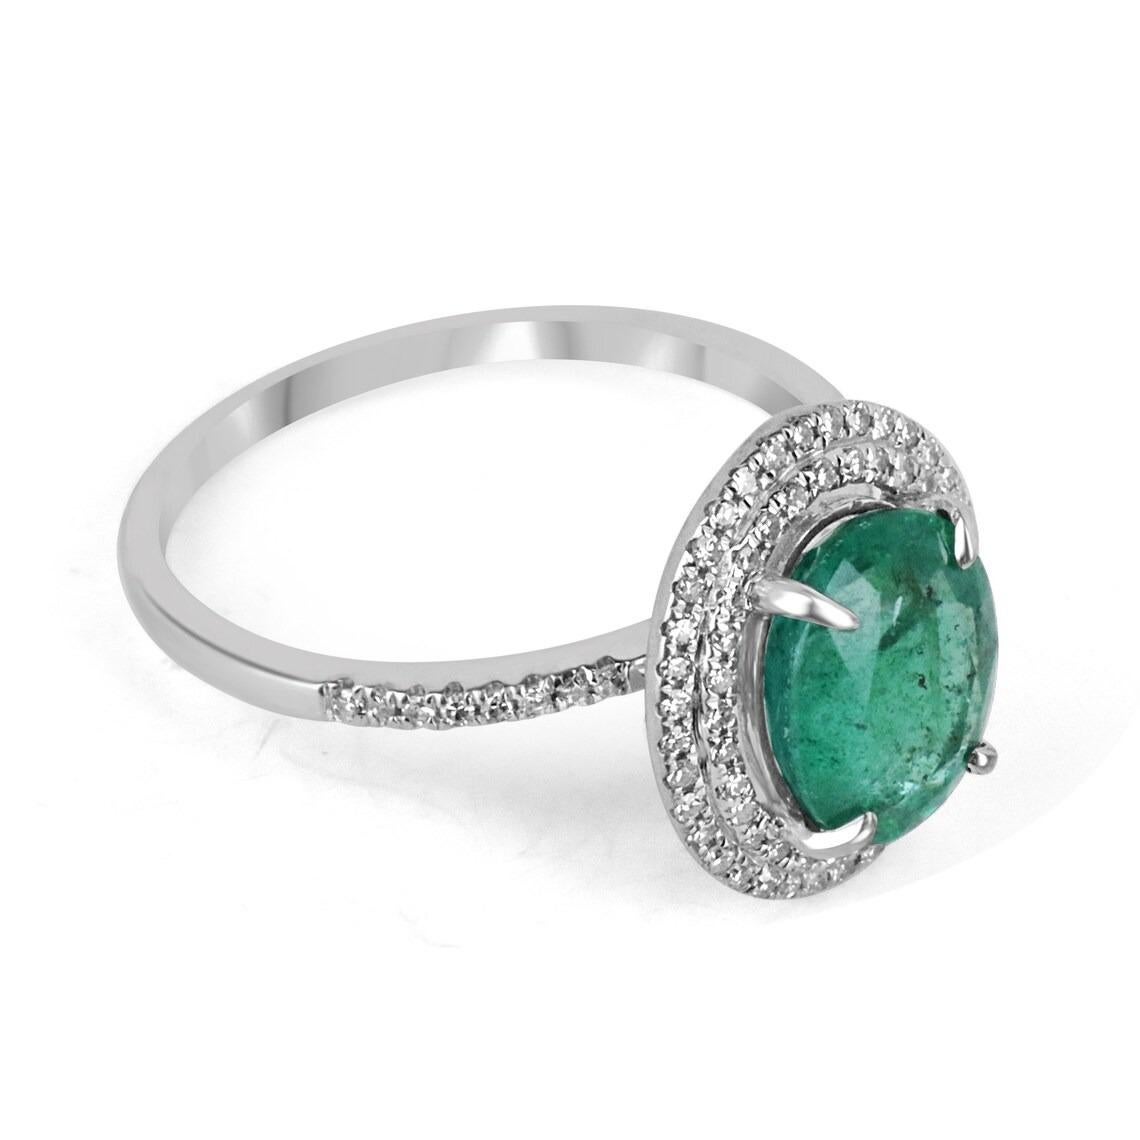 Featured is a stunning emerald and diamond ring. The center gemstone showcases a beautiful 3.16-carat, natural oval cut emerald from the origin of Zambia. Displaying a gorgeous and lush dark green color. This emerald is very good clarity with minor